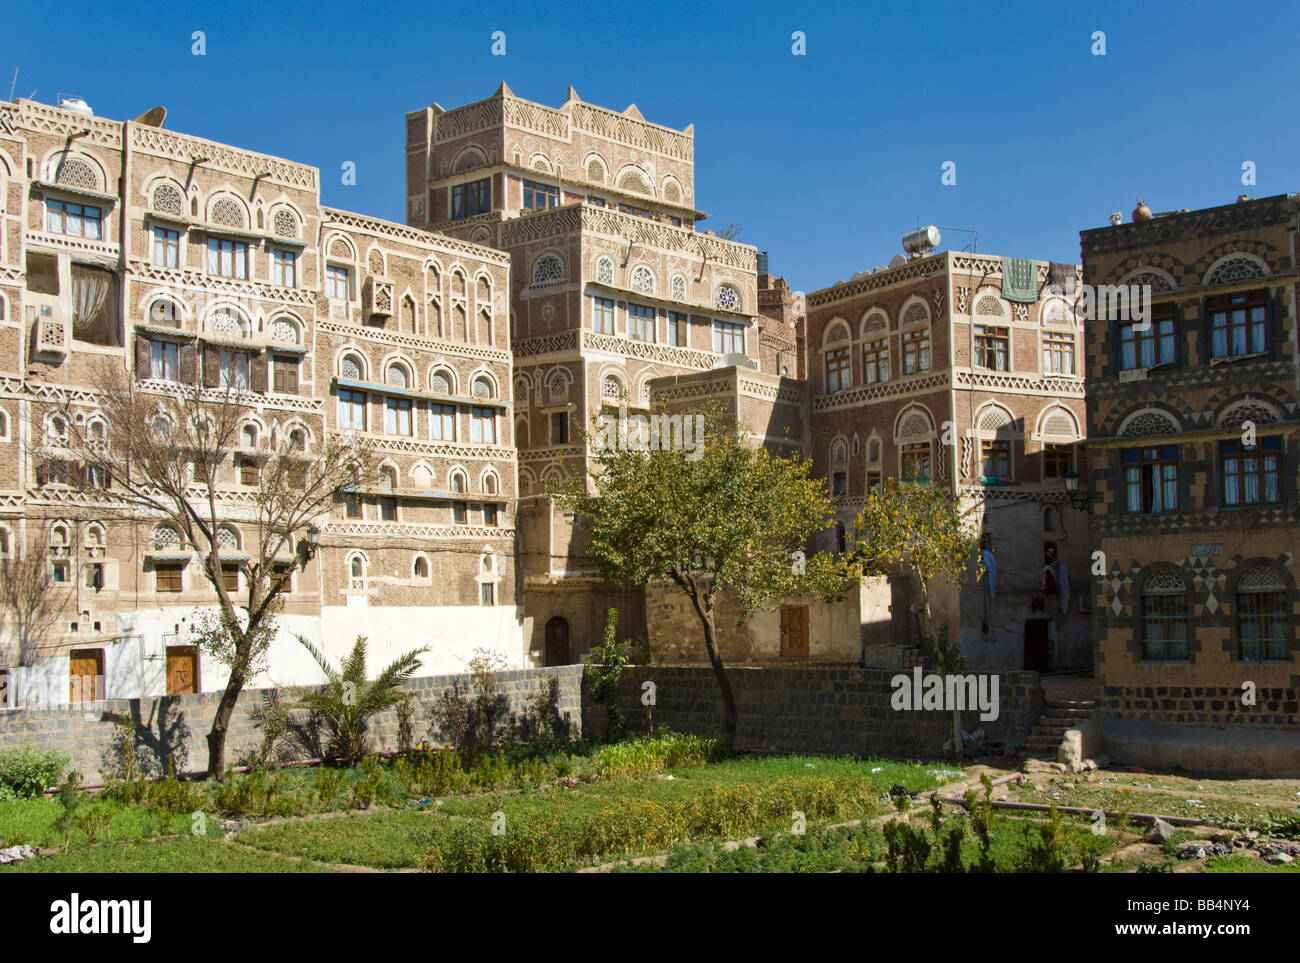 Traditional garden bustan with buildings in the old town district of Sana'a Yemen Stock Photo